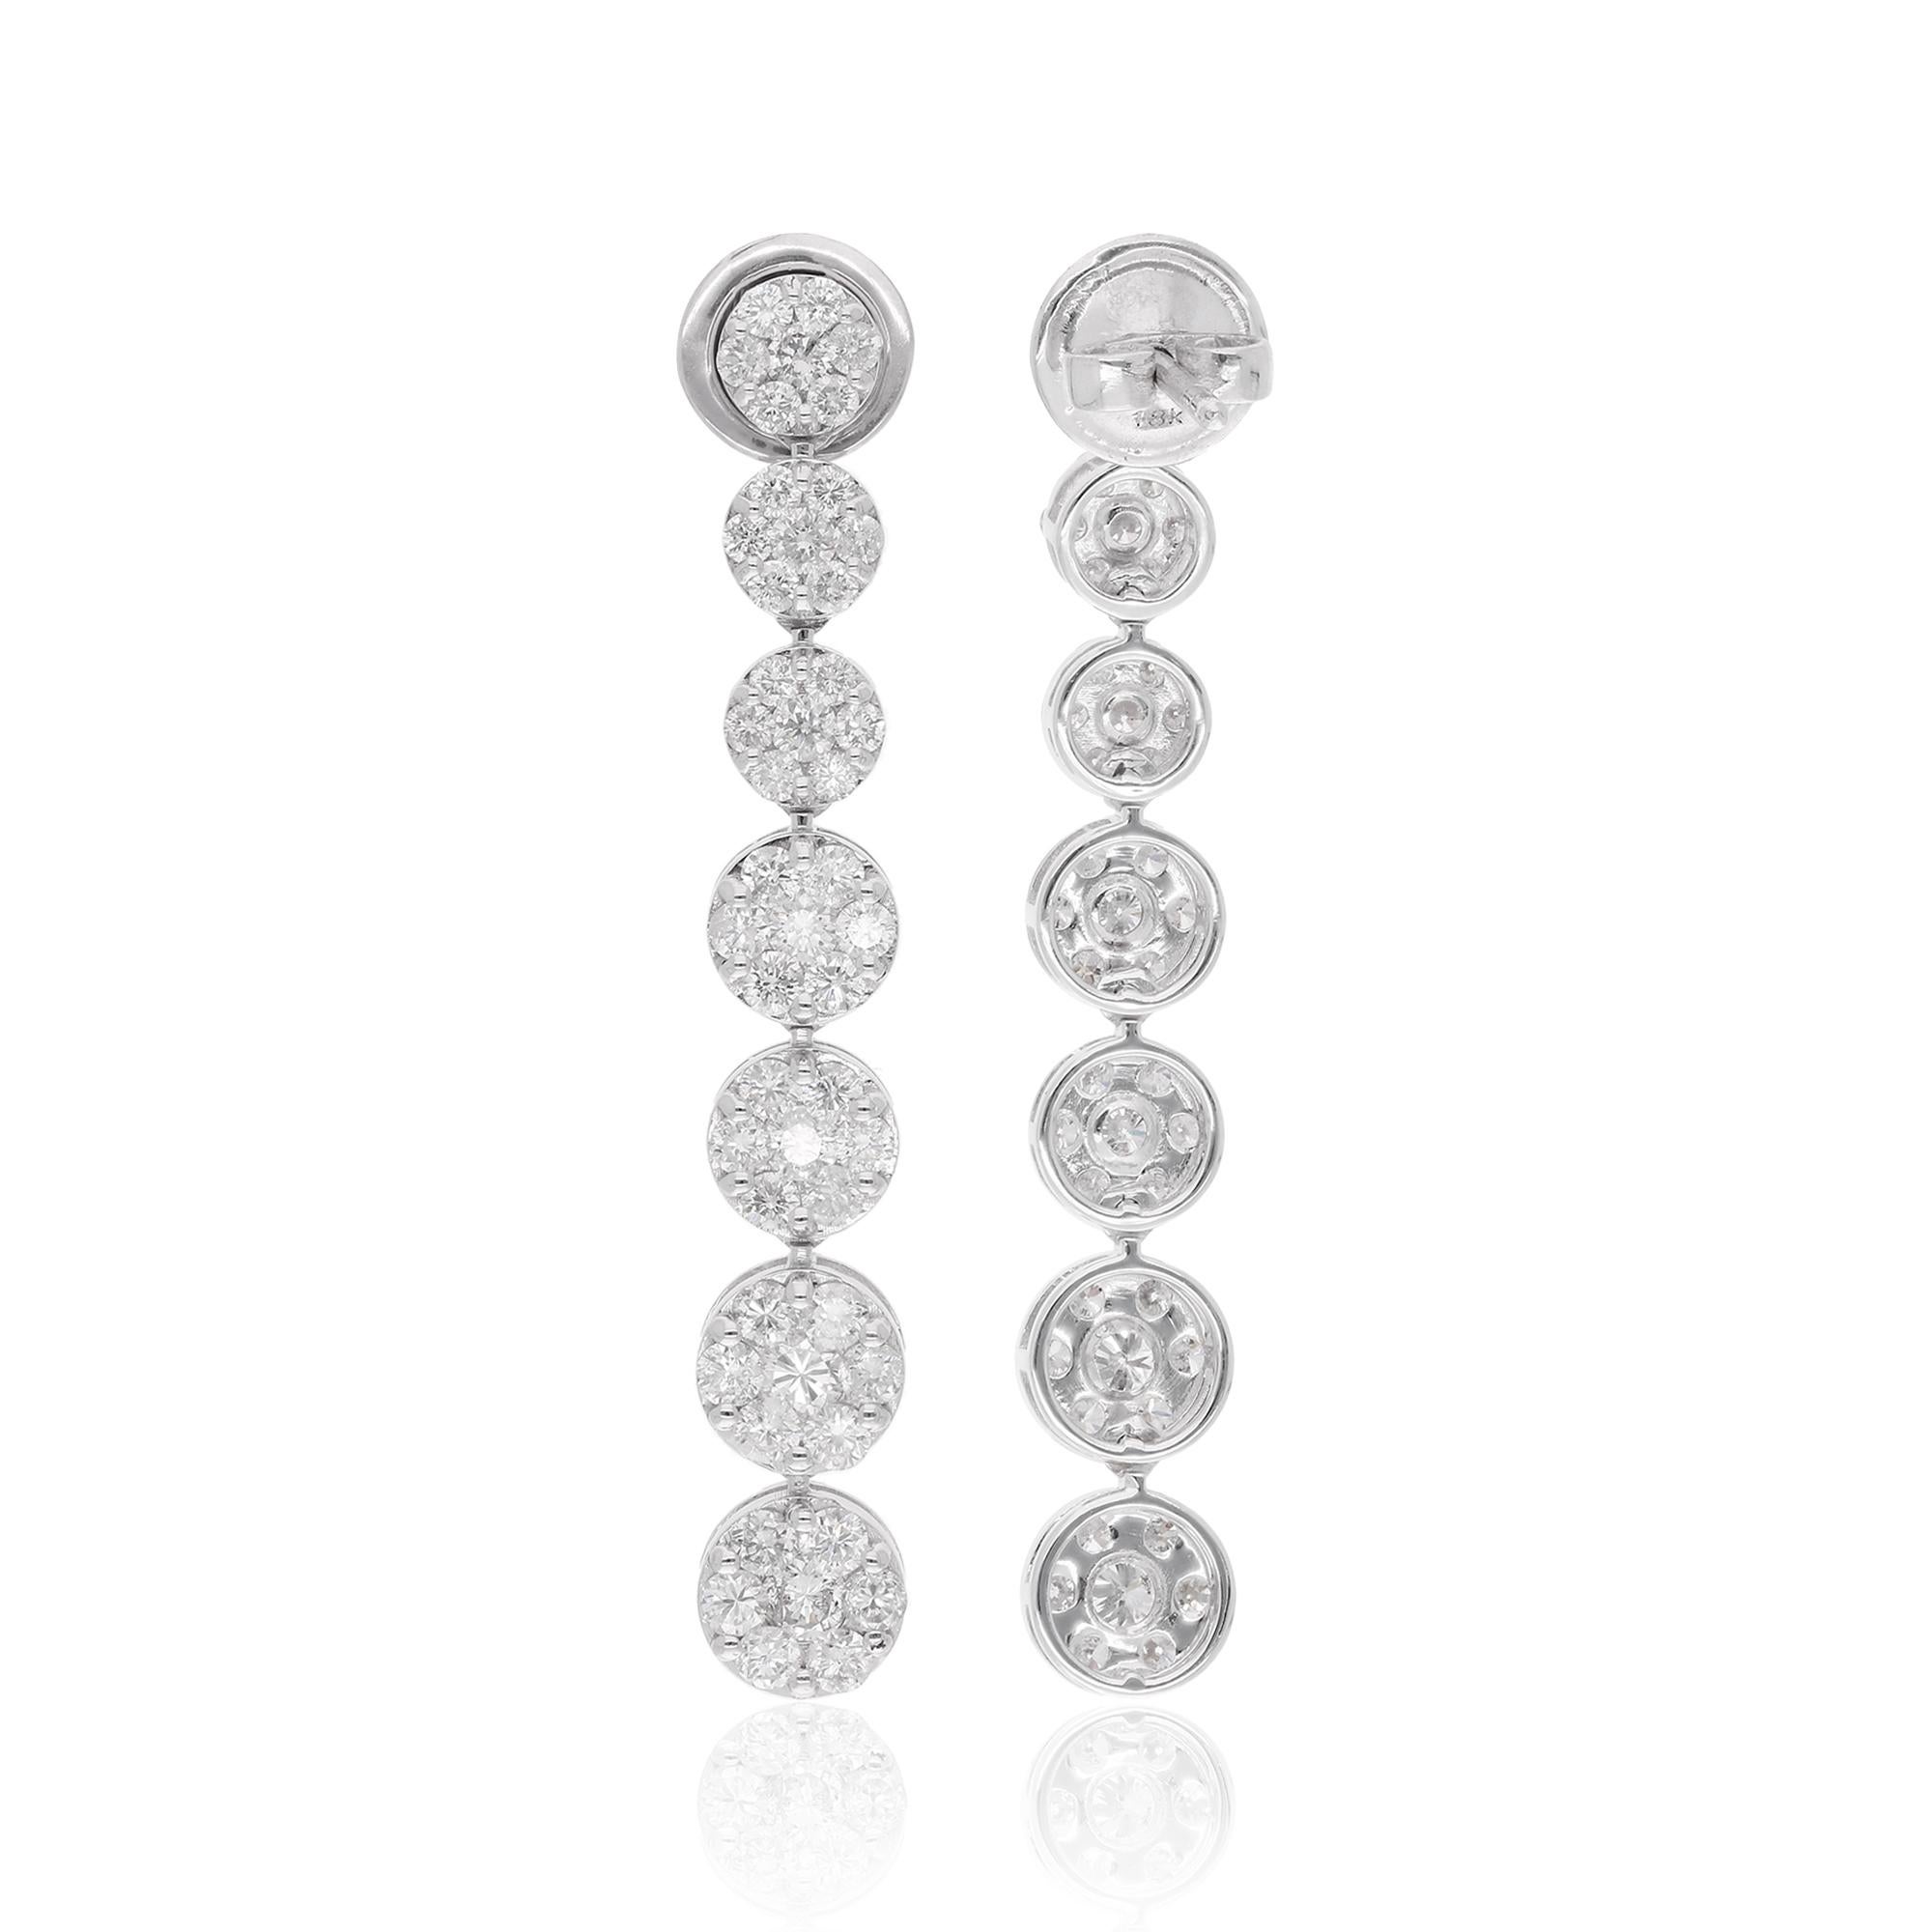 It appears you're describing a pair of dangle earrings made from 18 karat white gold, featuring pave-set diamonds with a total weight of 3.20 carats. These earrings are also characterized as handmade jewelry, which often suggests a higher level of